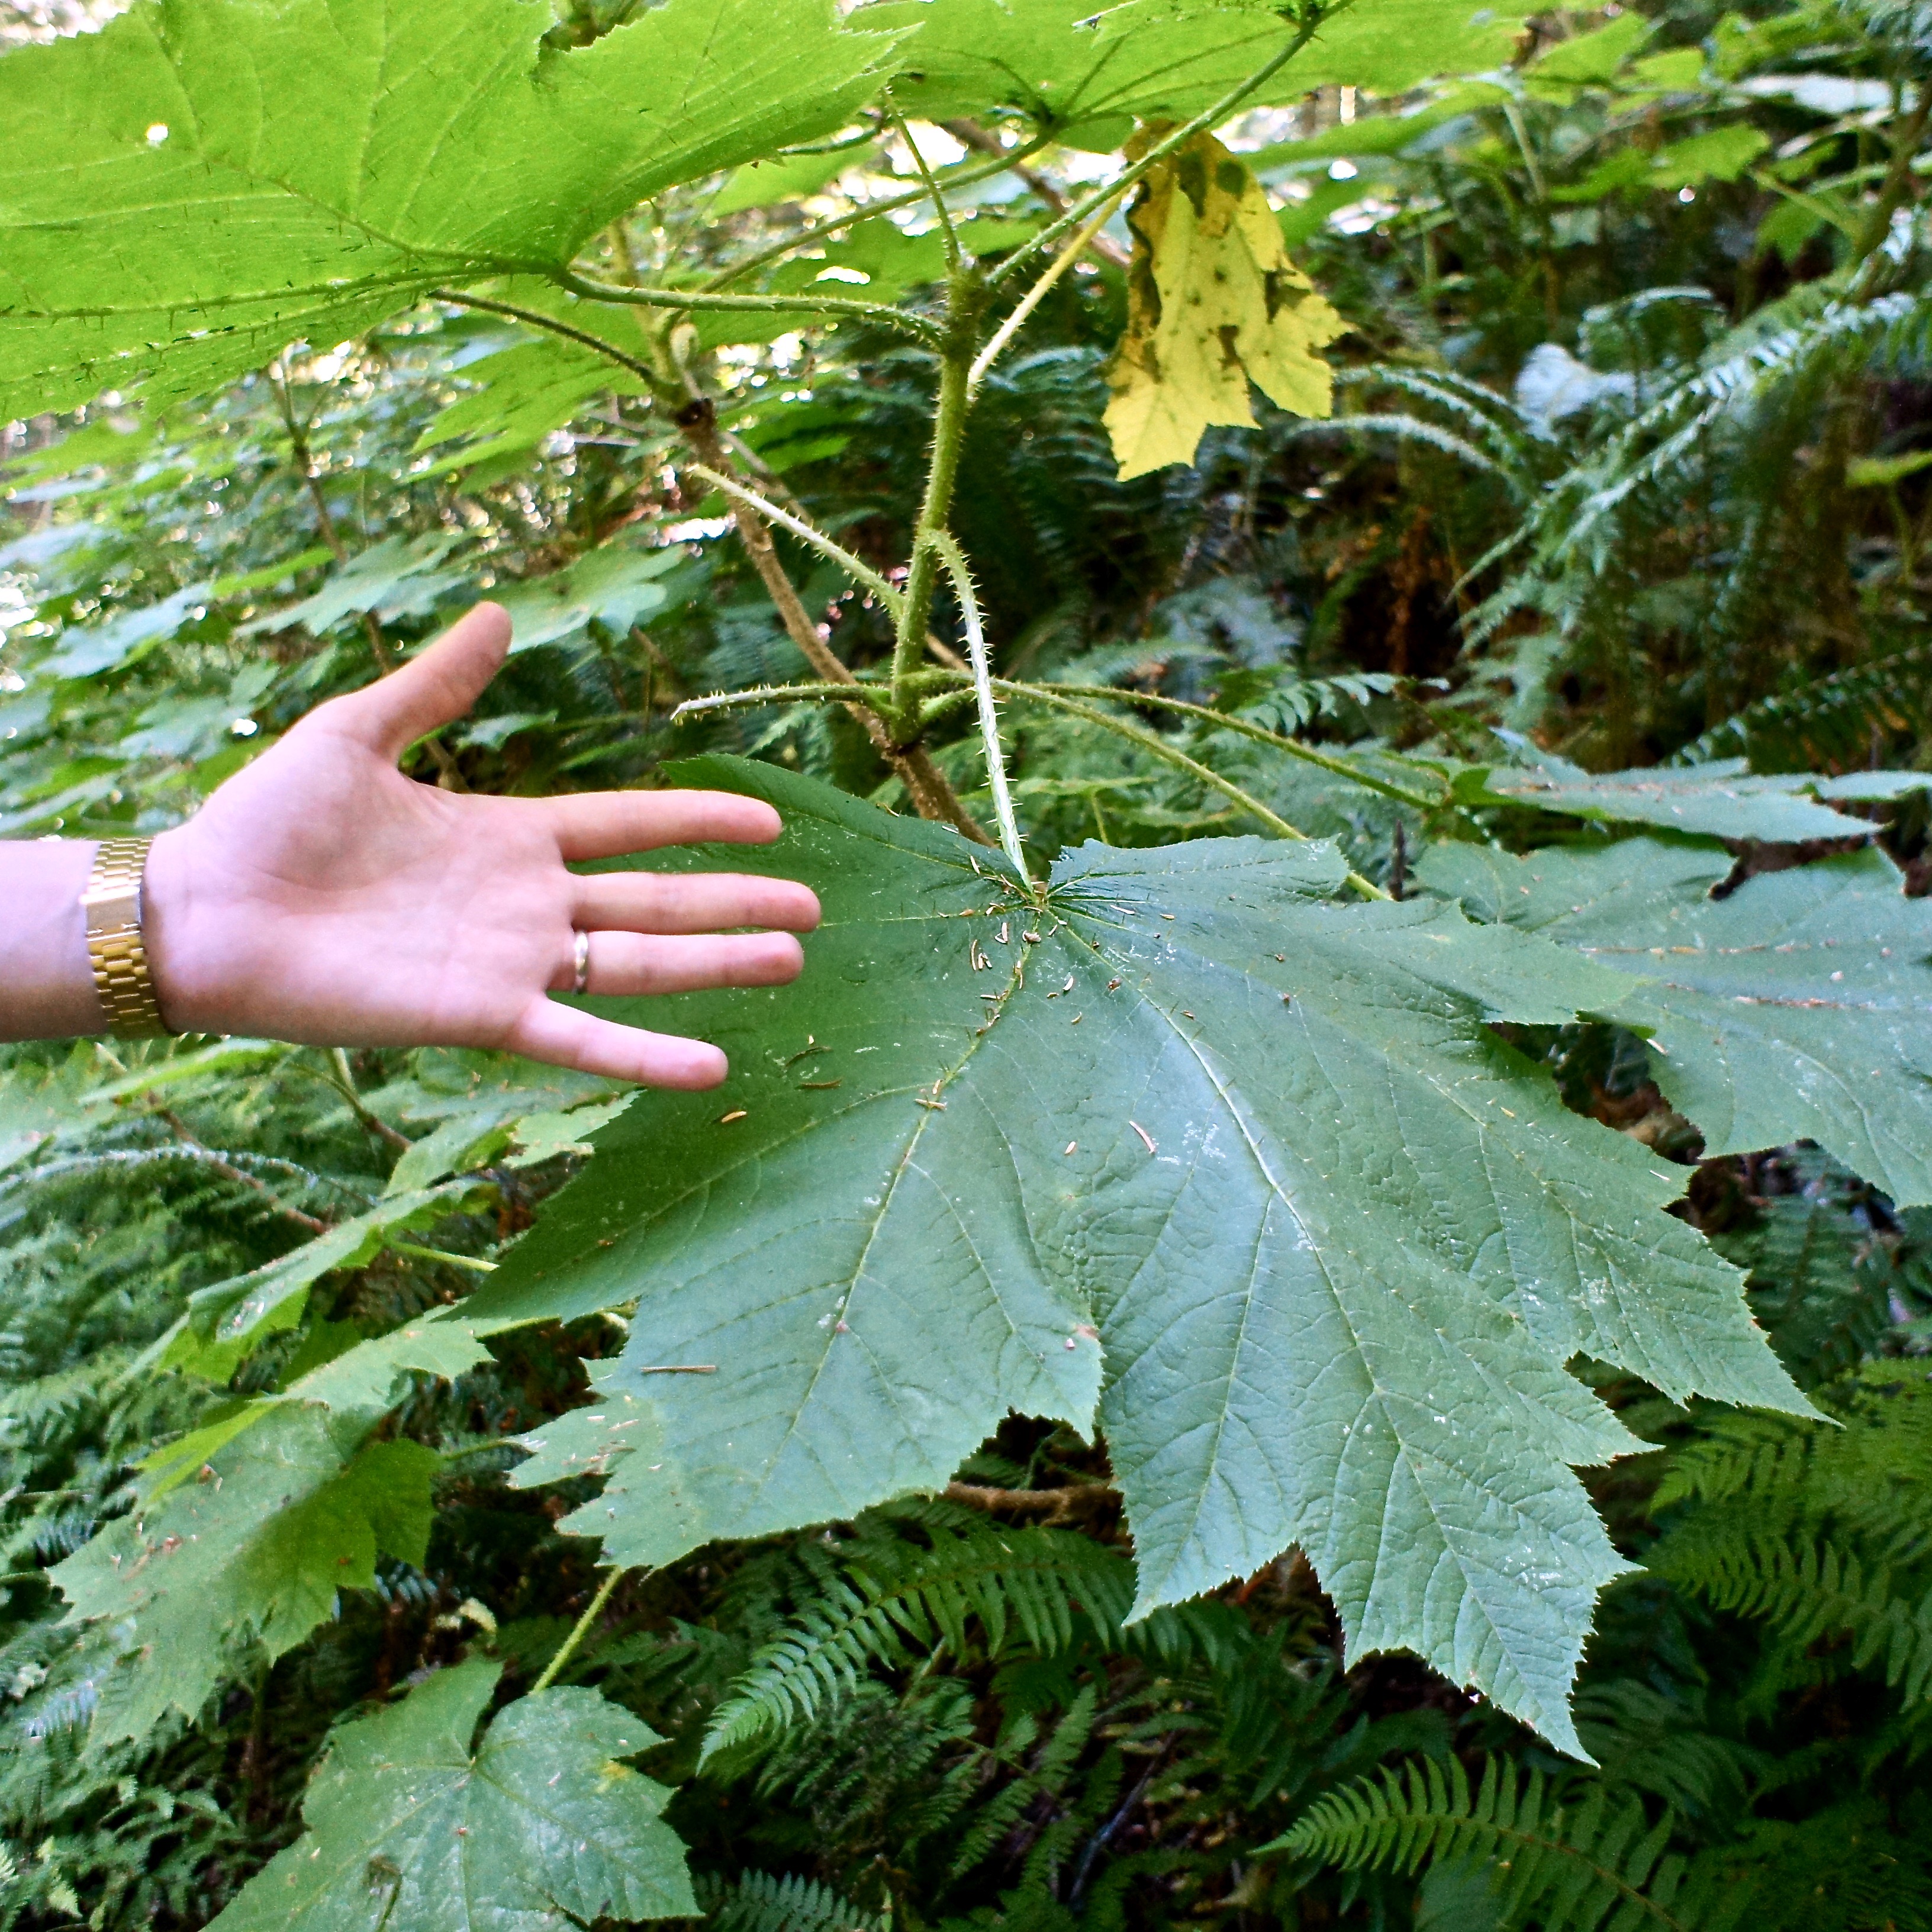 Some big old tree leaves on this trail. Nick's hand for comparison!